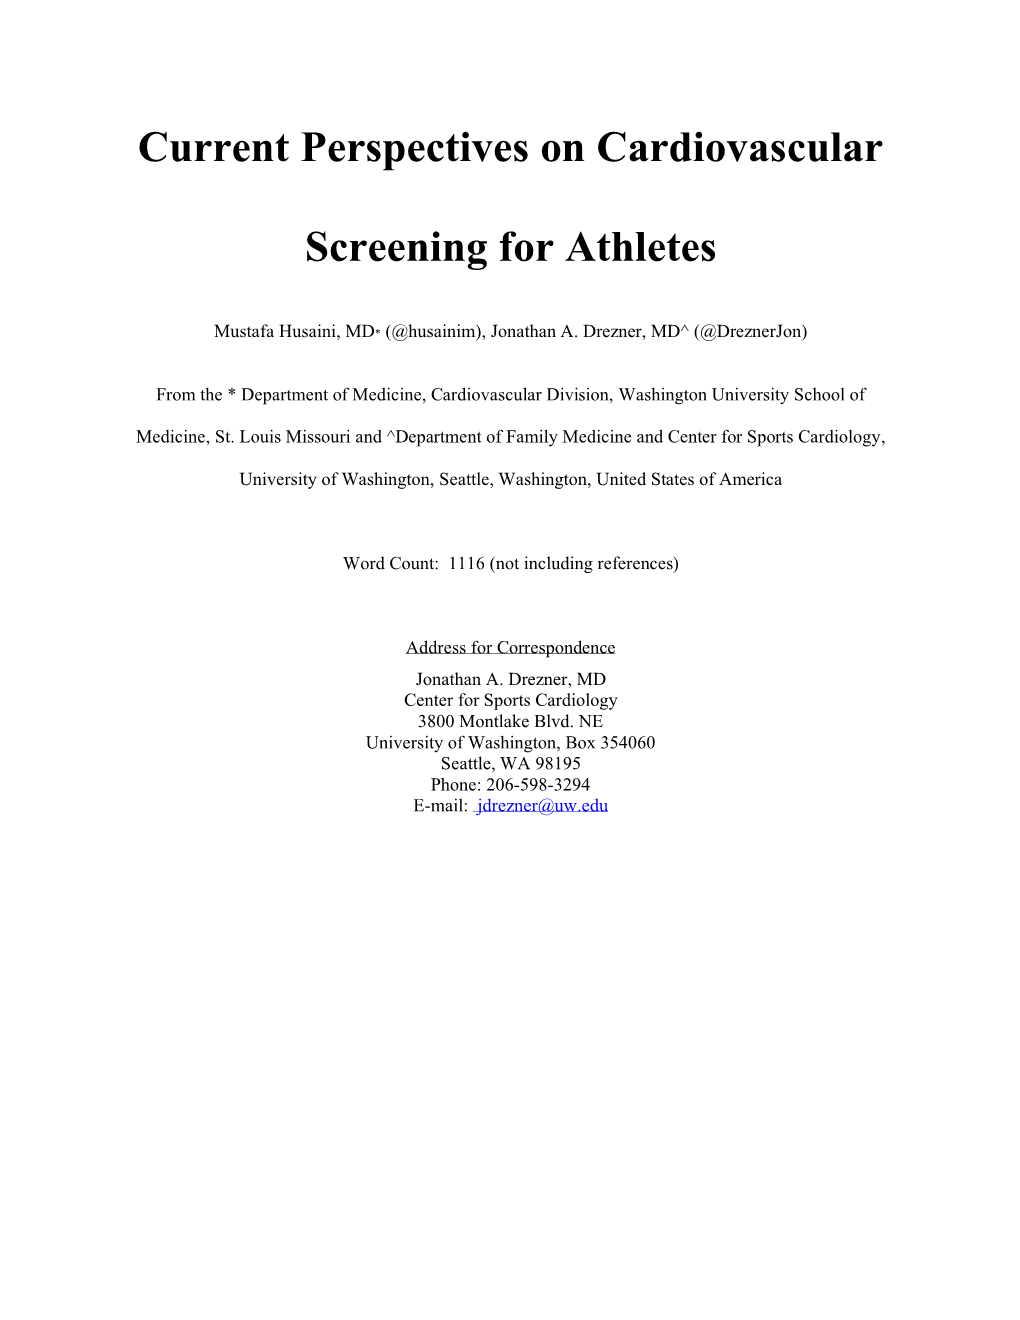 Current Perspectives on Cardiovascular Screening for Athletes